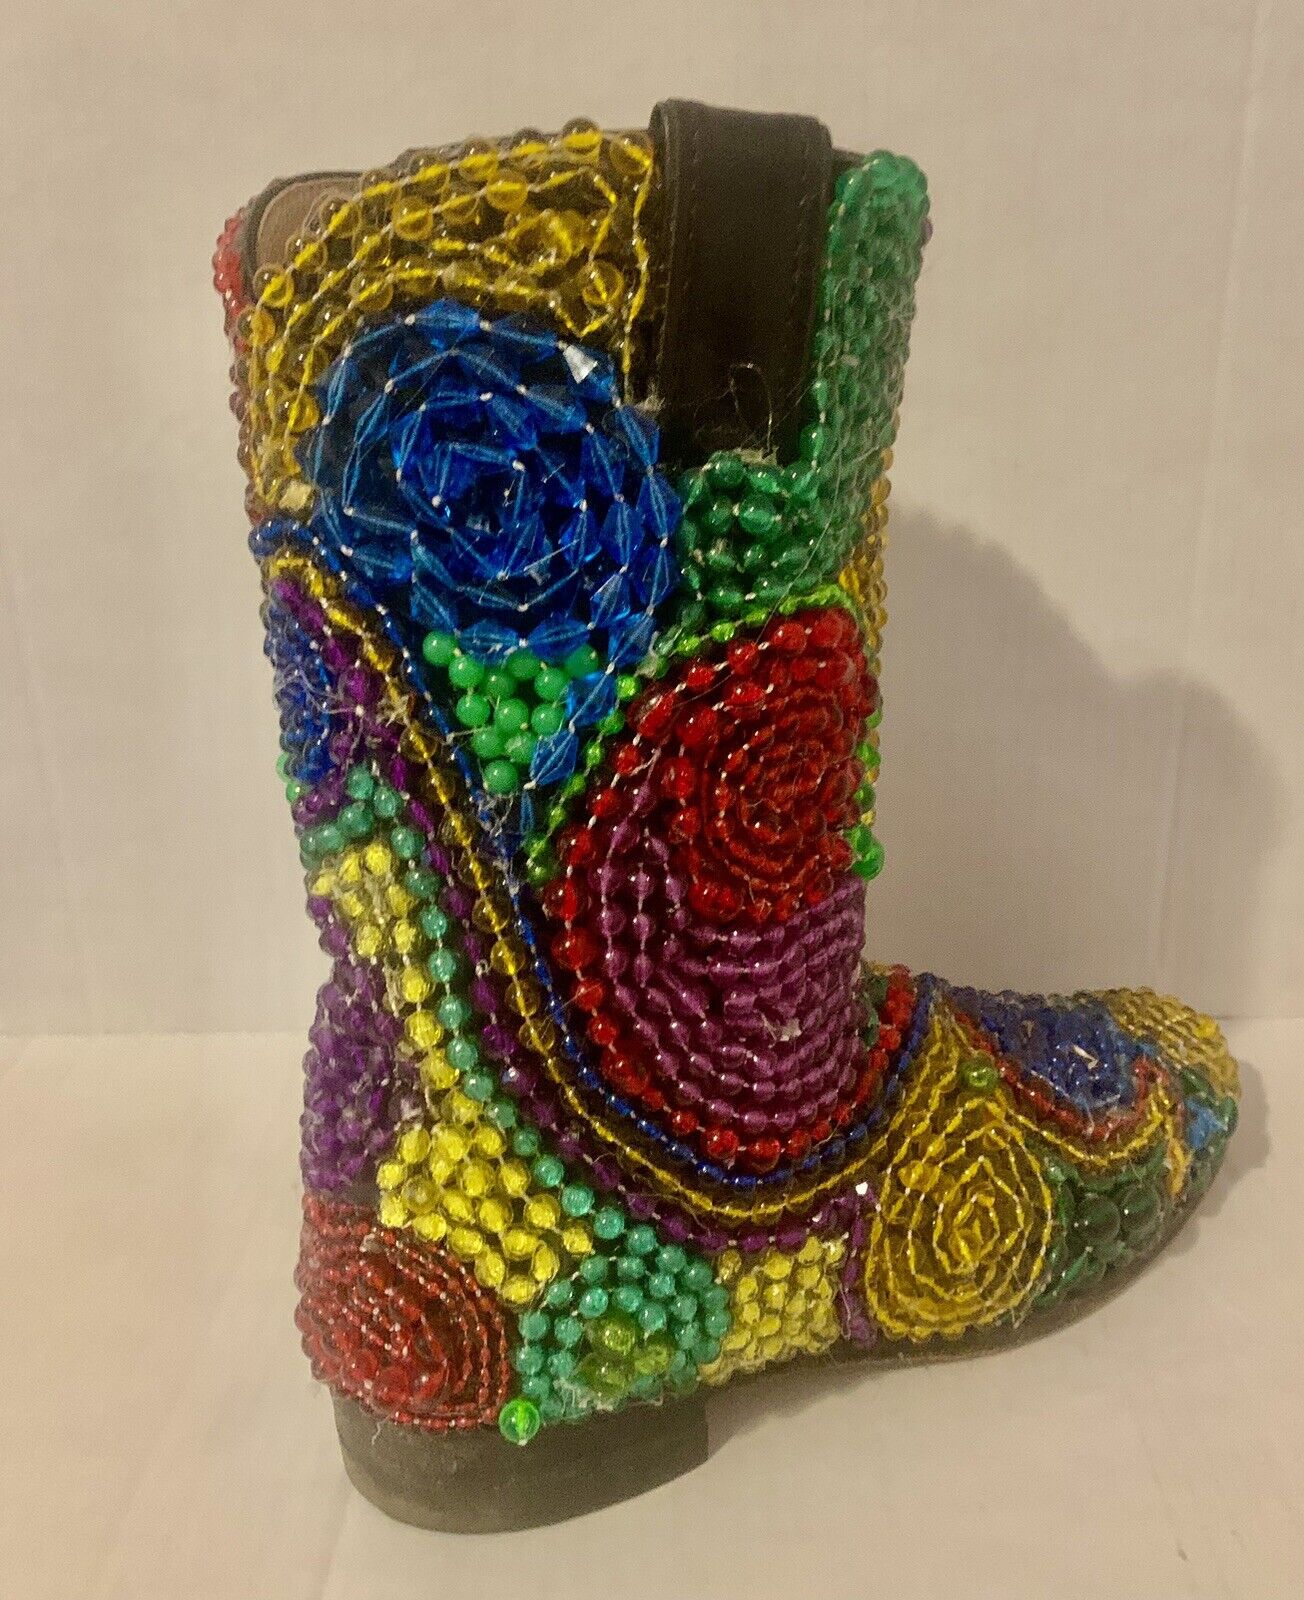 Hand Beaded Cowboy|Cowgirl Boot Southwestern Art  Home Decor| Hand Crafted